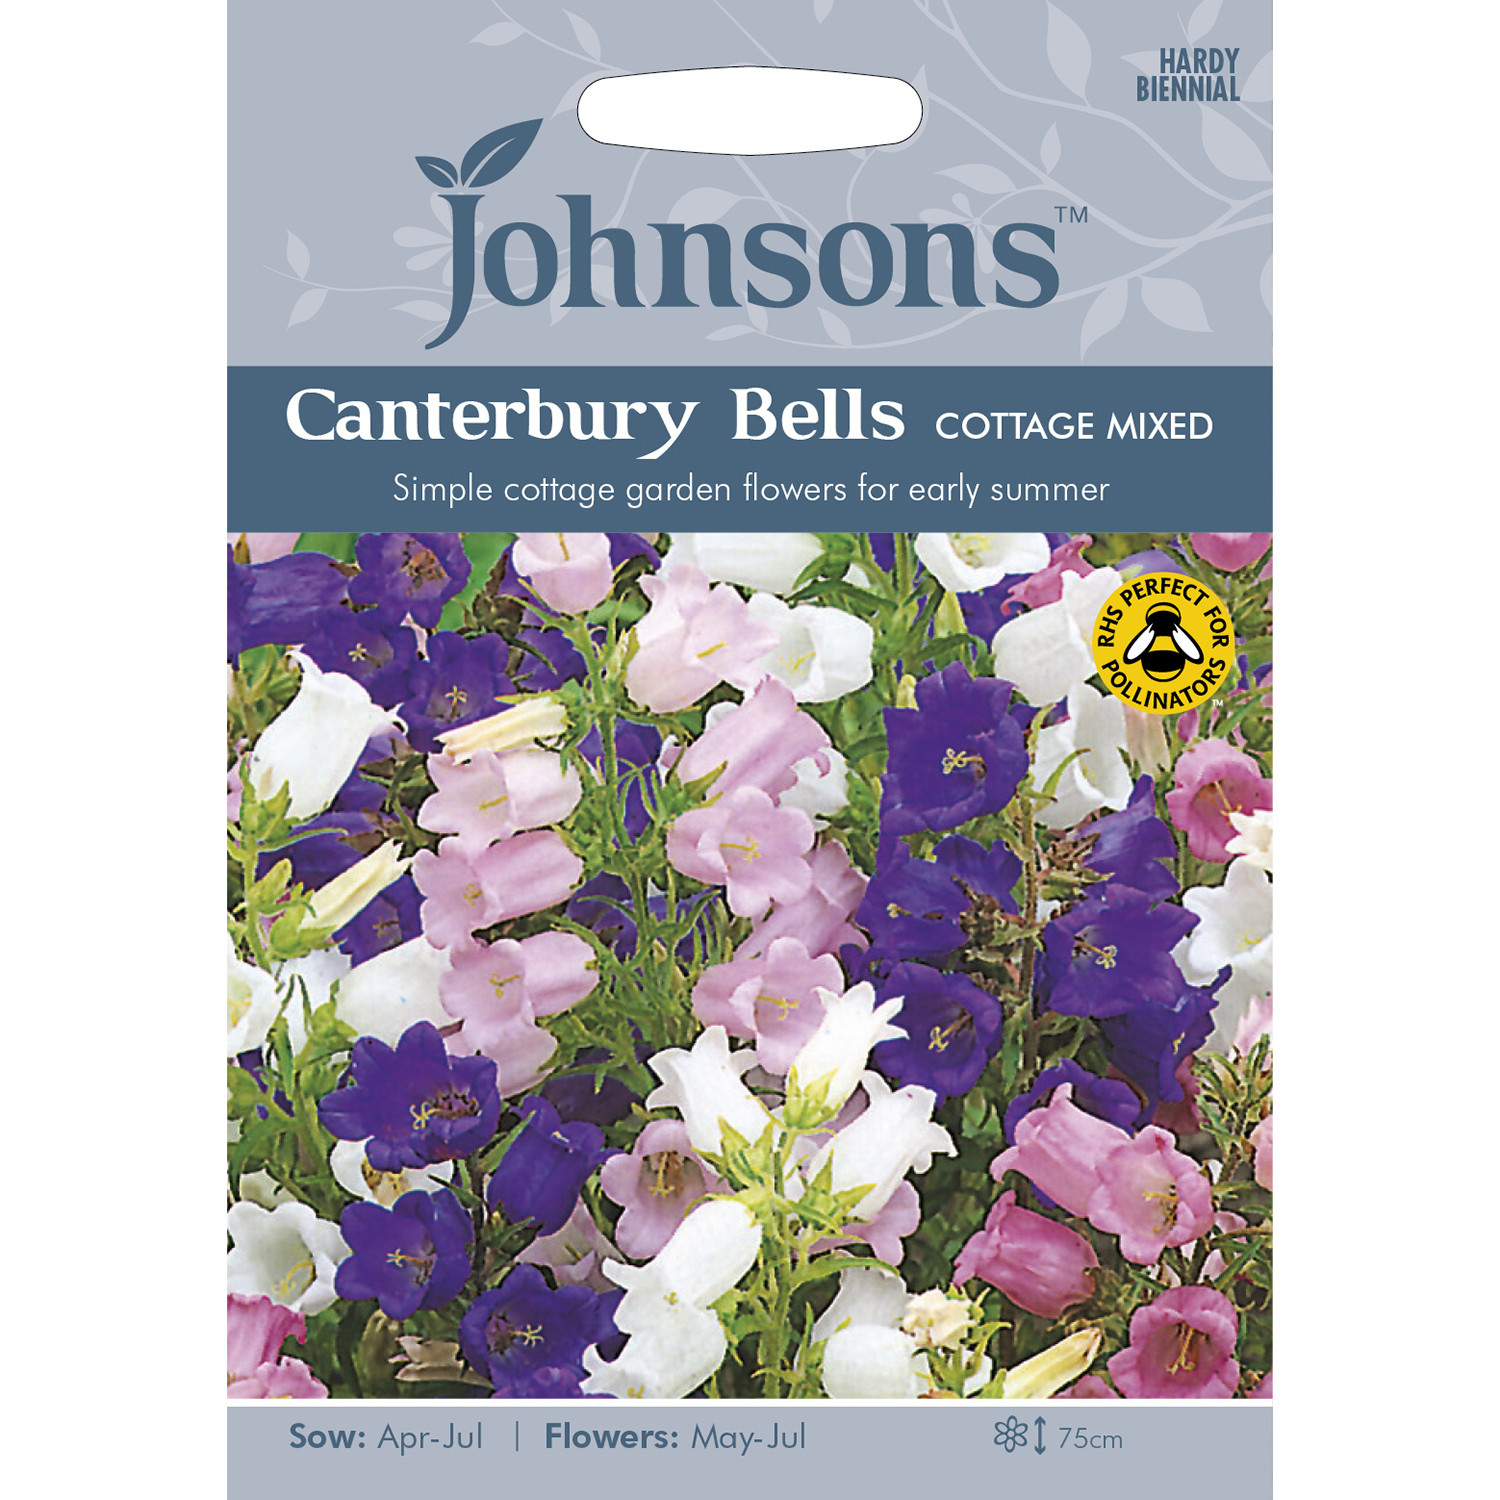 Johnsons Canterbury Bells Cottage Mixed Flower Seeds Image 2